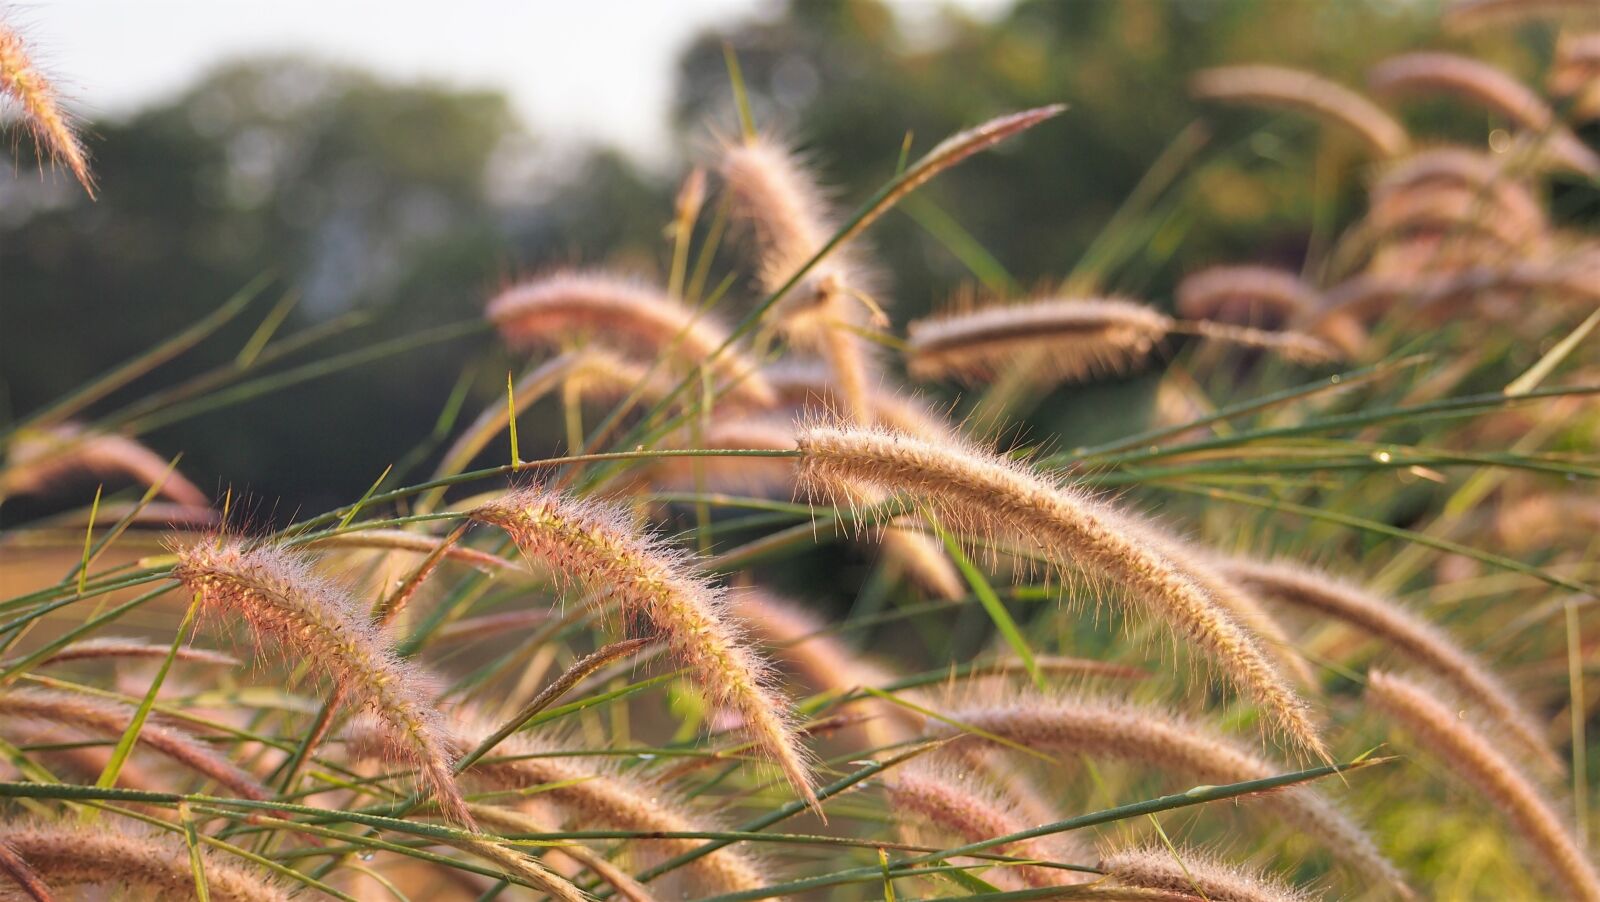 Olympus PEN E-PL3 sample photo. Flowering grass, nature, grass photography